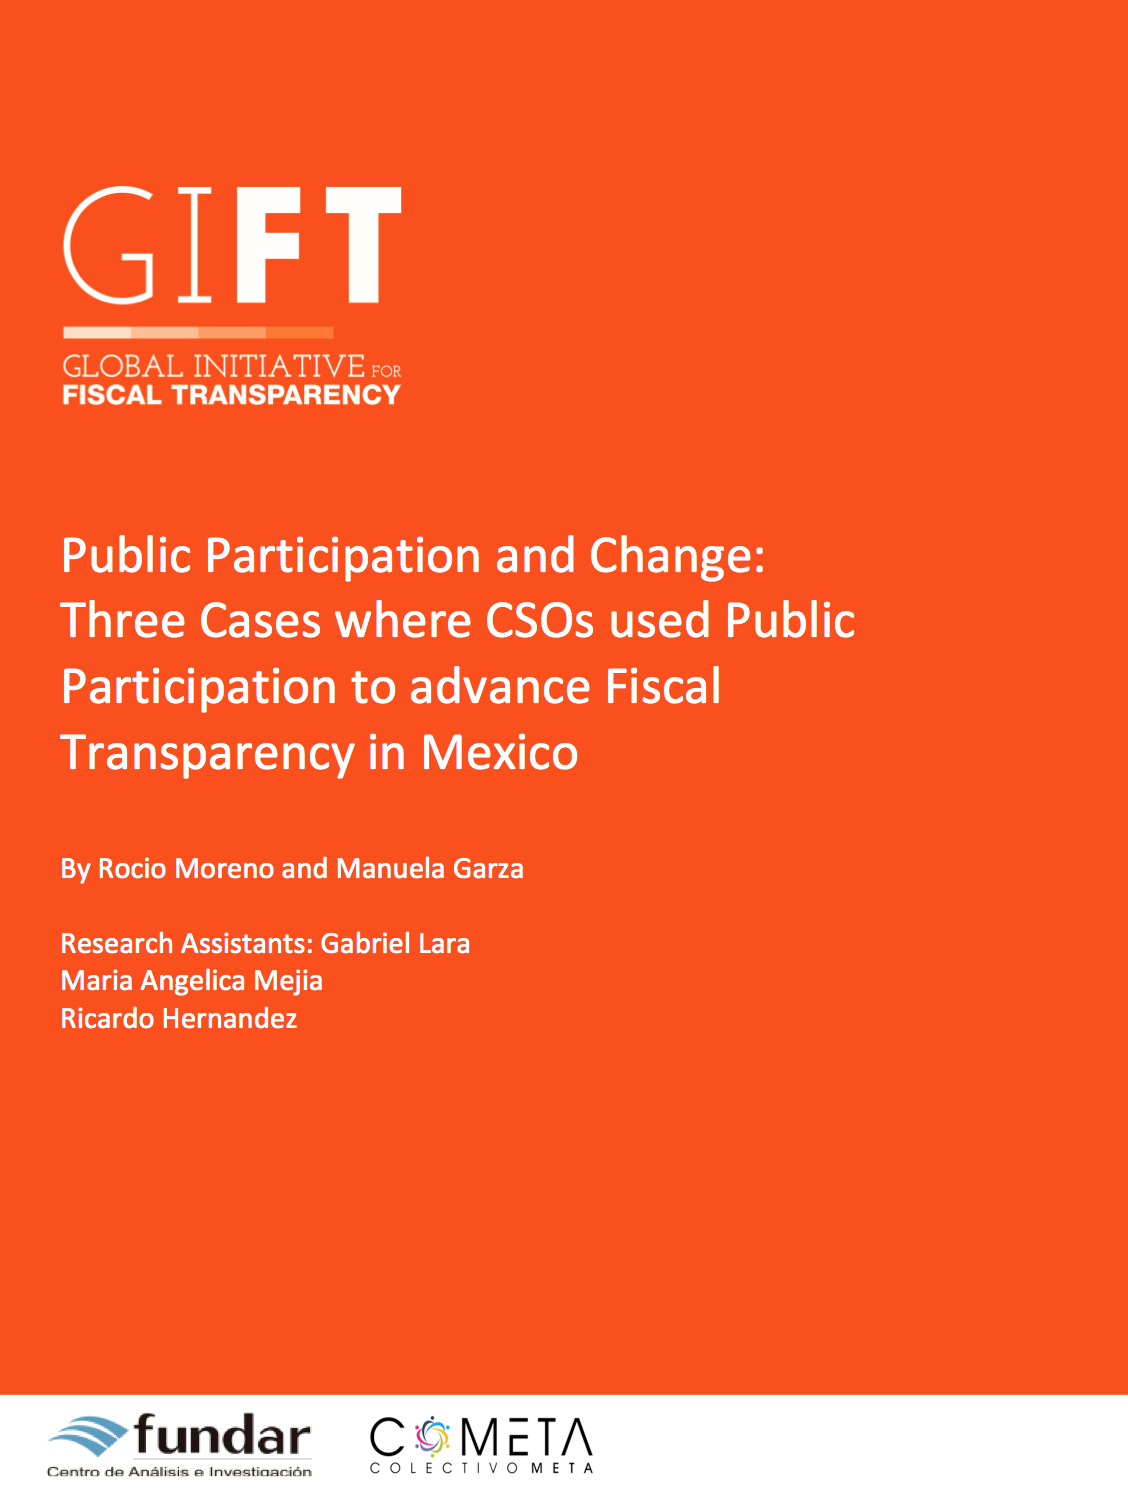 Public Participation and Change: Three Cases where CSOs used Public Participation to advance Fiscal Transparency in Mexico